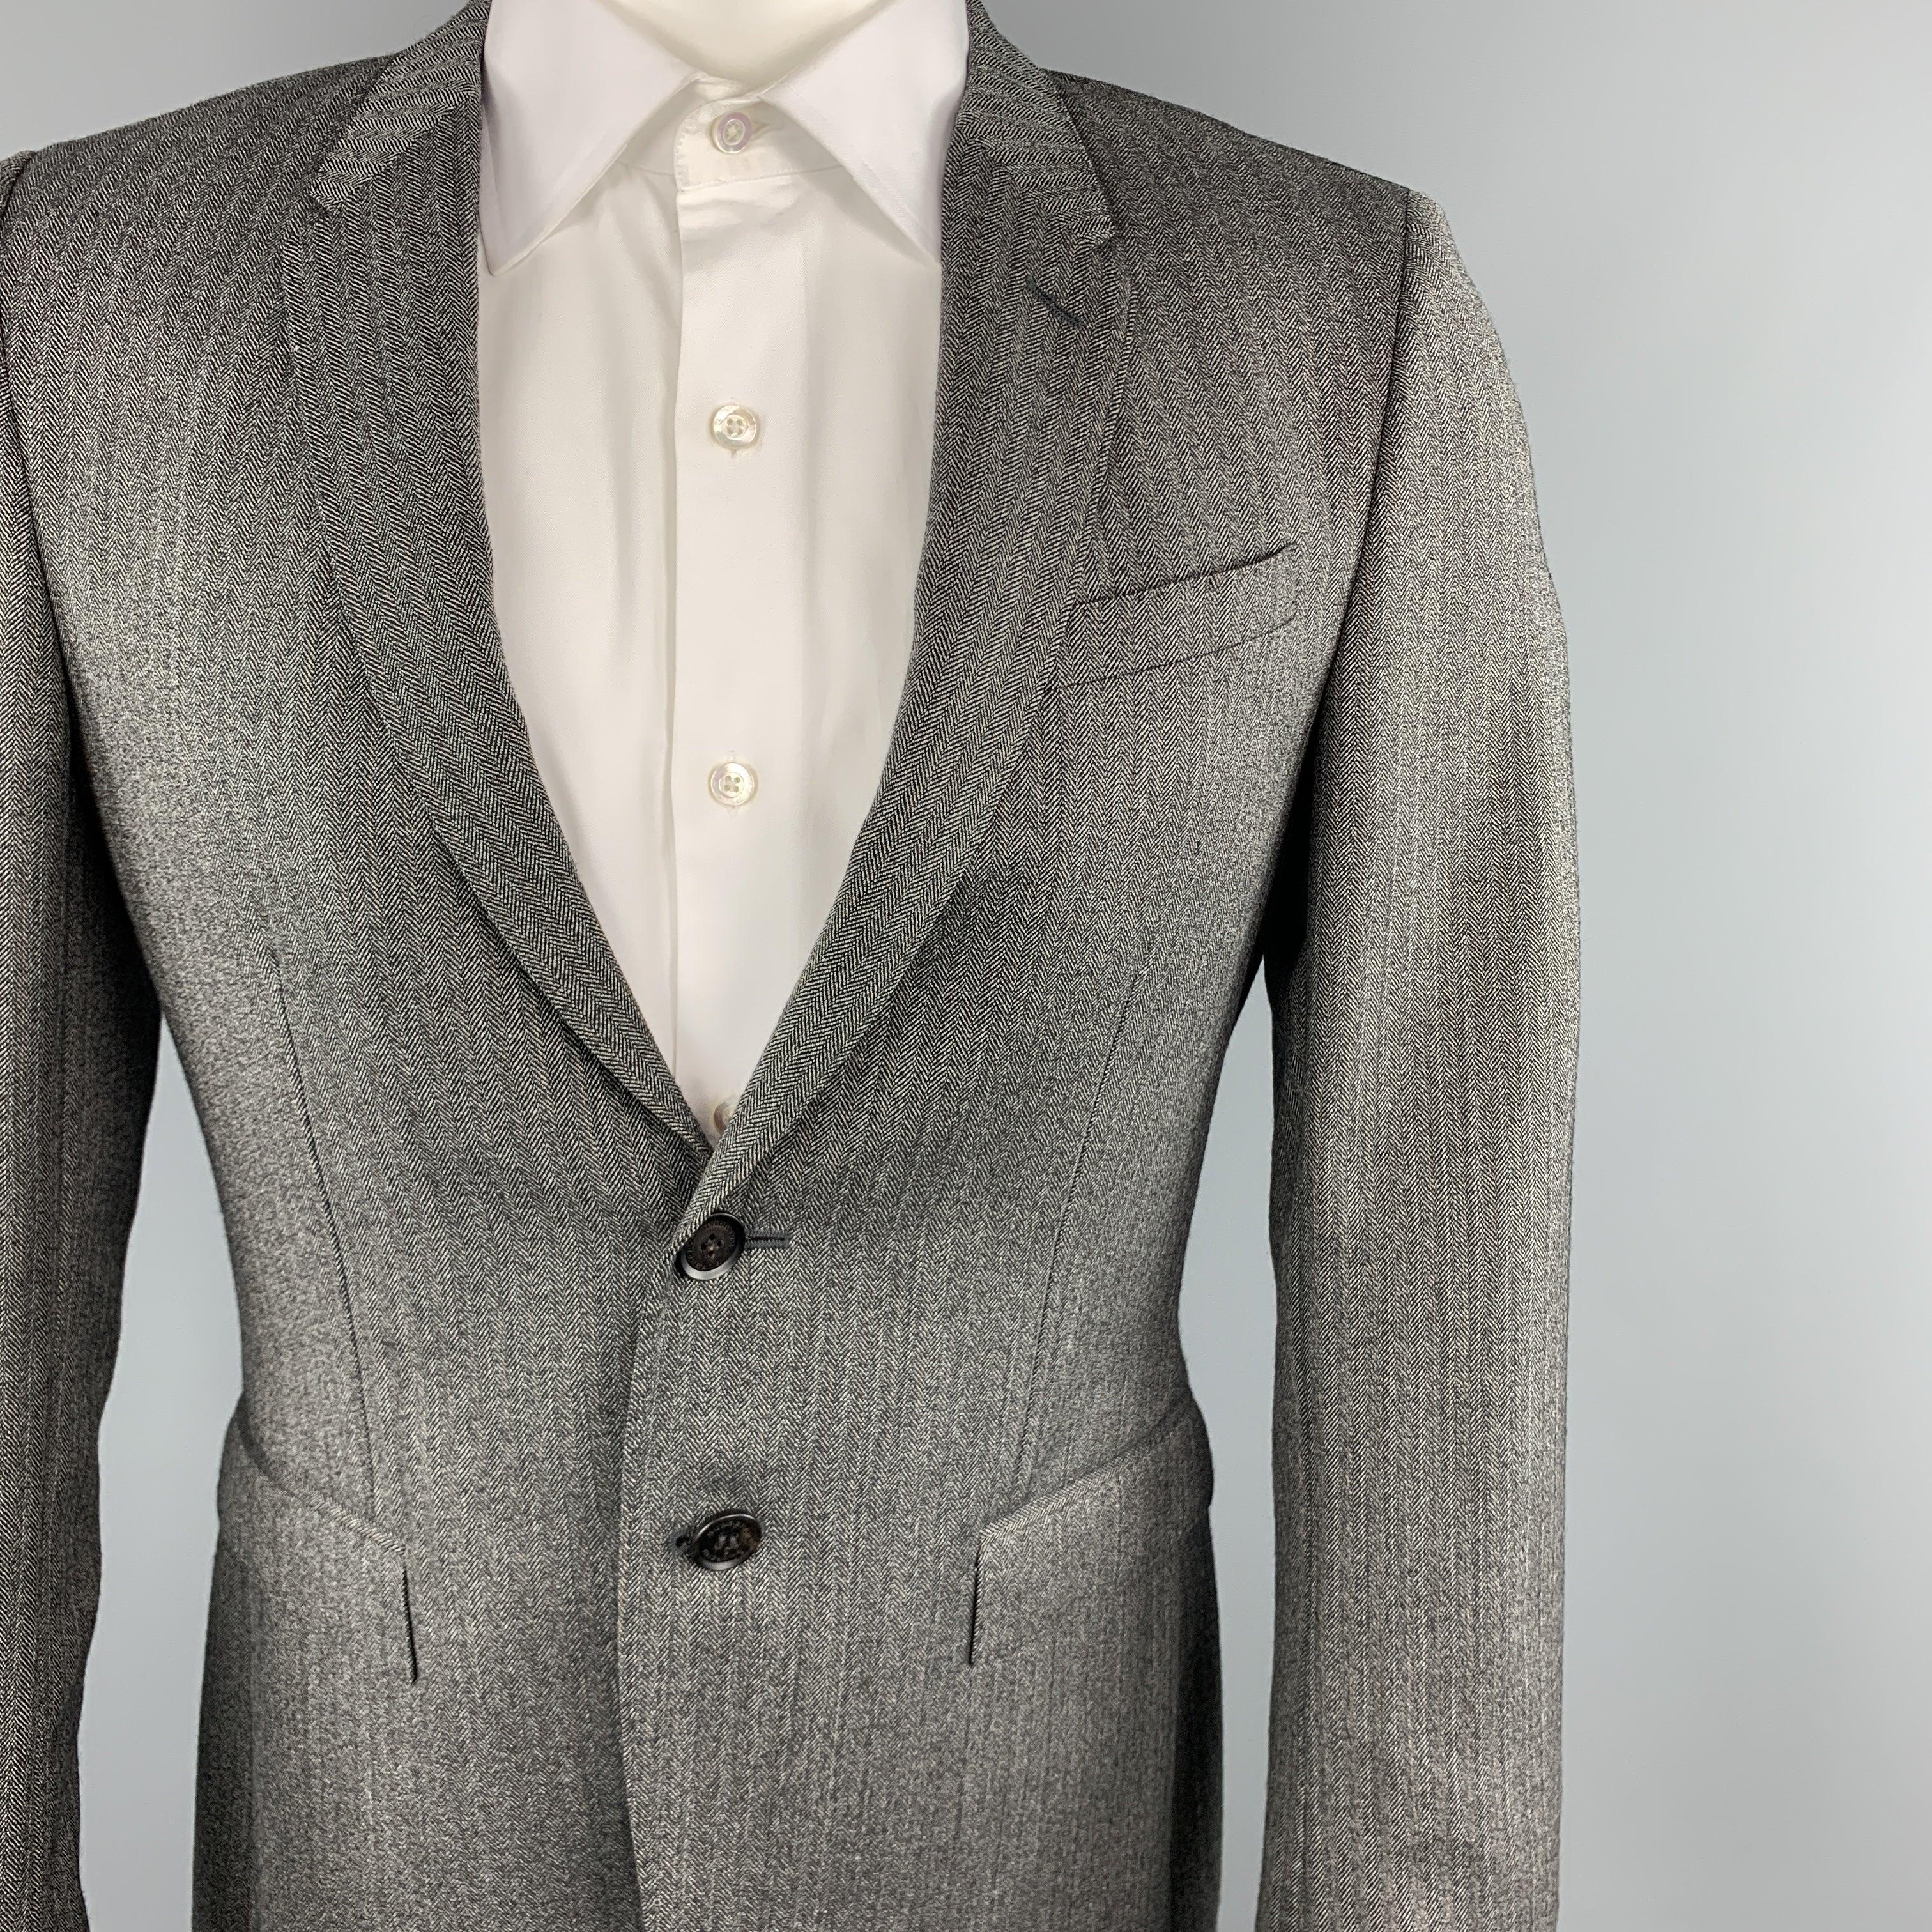 BURBERRY PRORSUM 40 Grey Herringbone Wool 32 x 32 Notch Lapel  Suit In Excellent Condition For Sale In San Francisco, CA